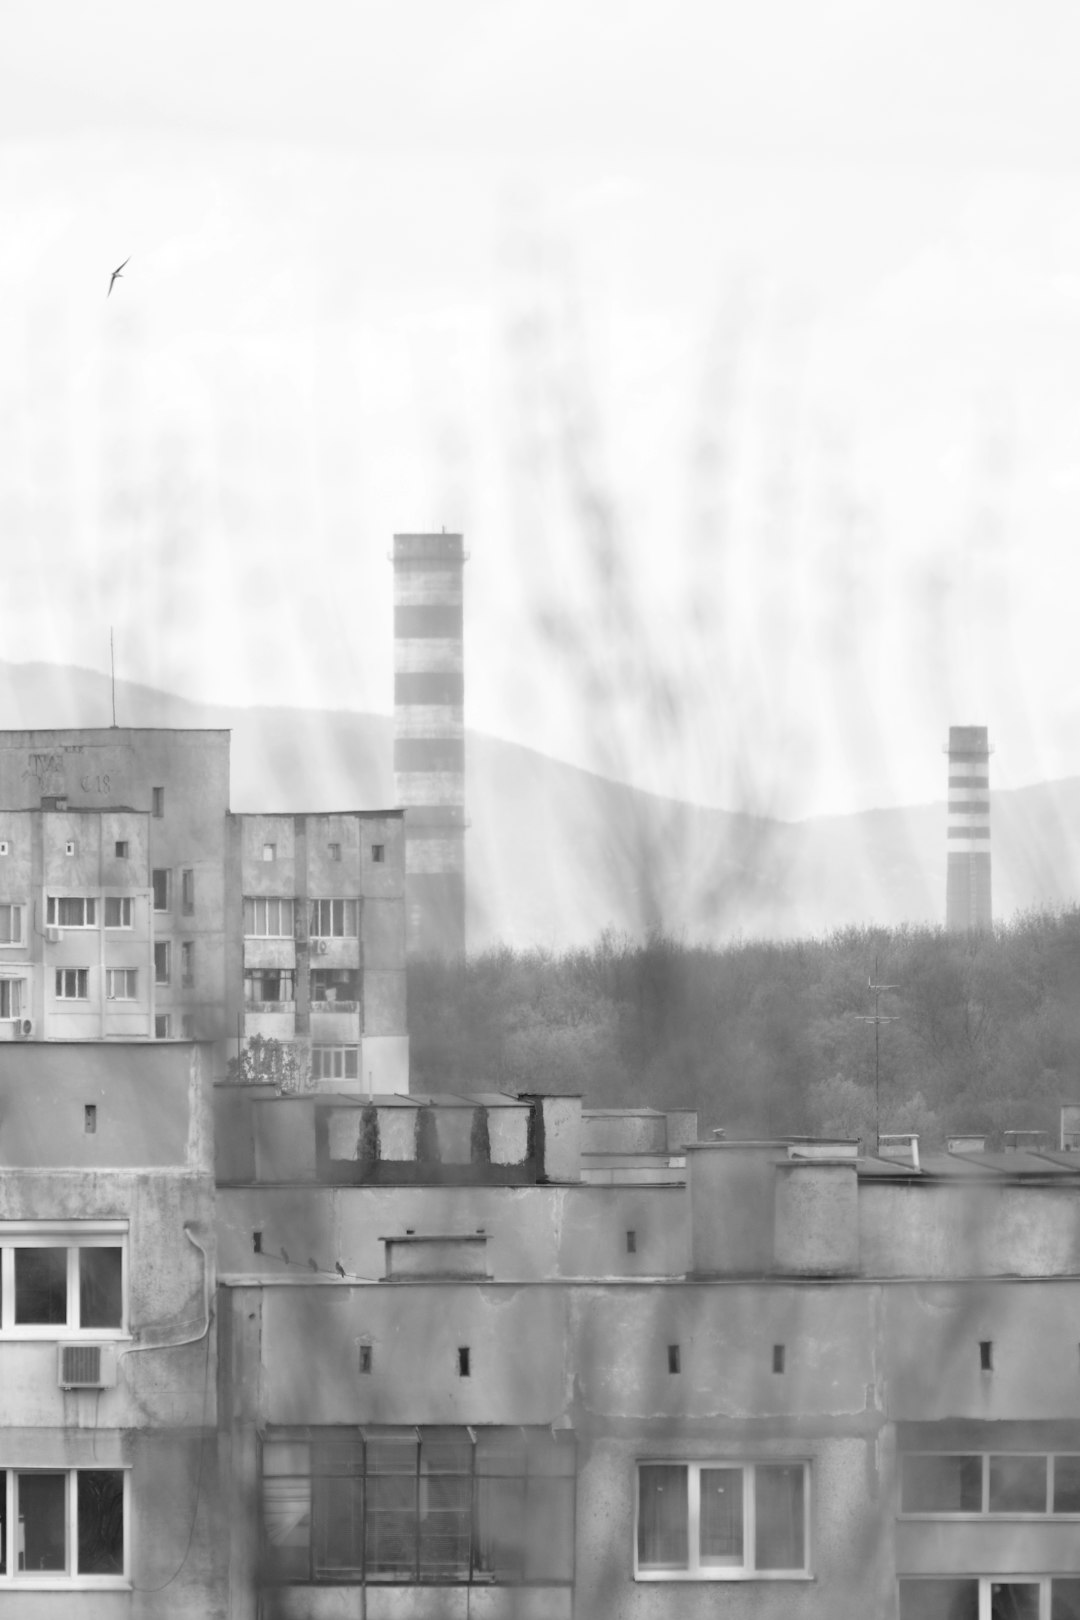 Black and white polluted neighborhood next to coal power plant chimneys